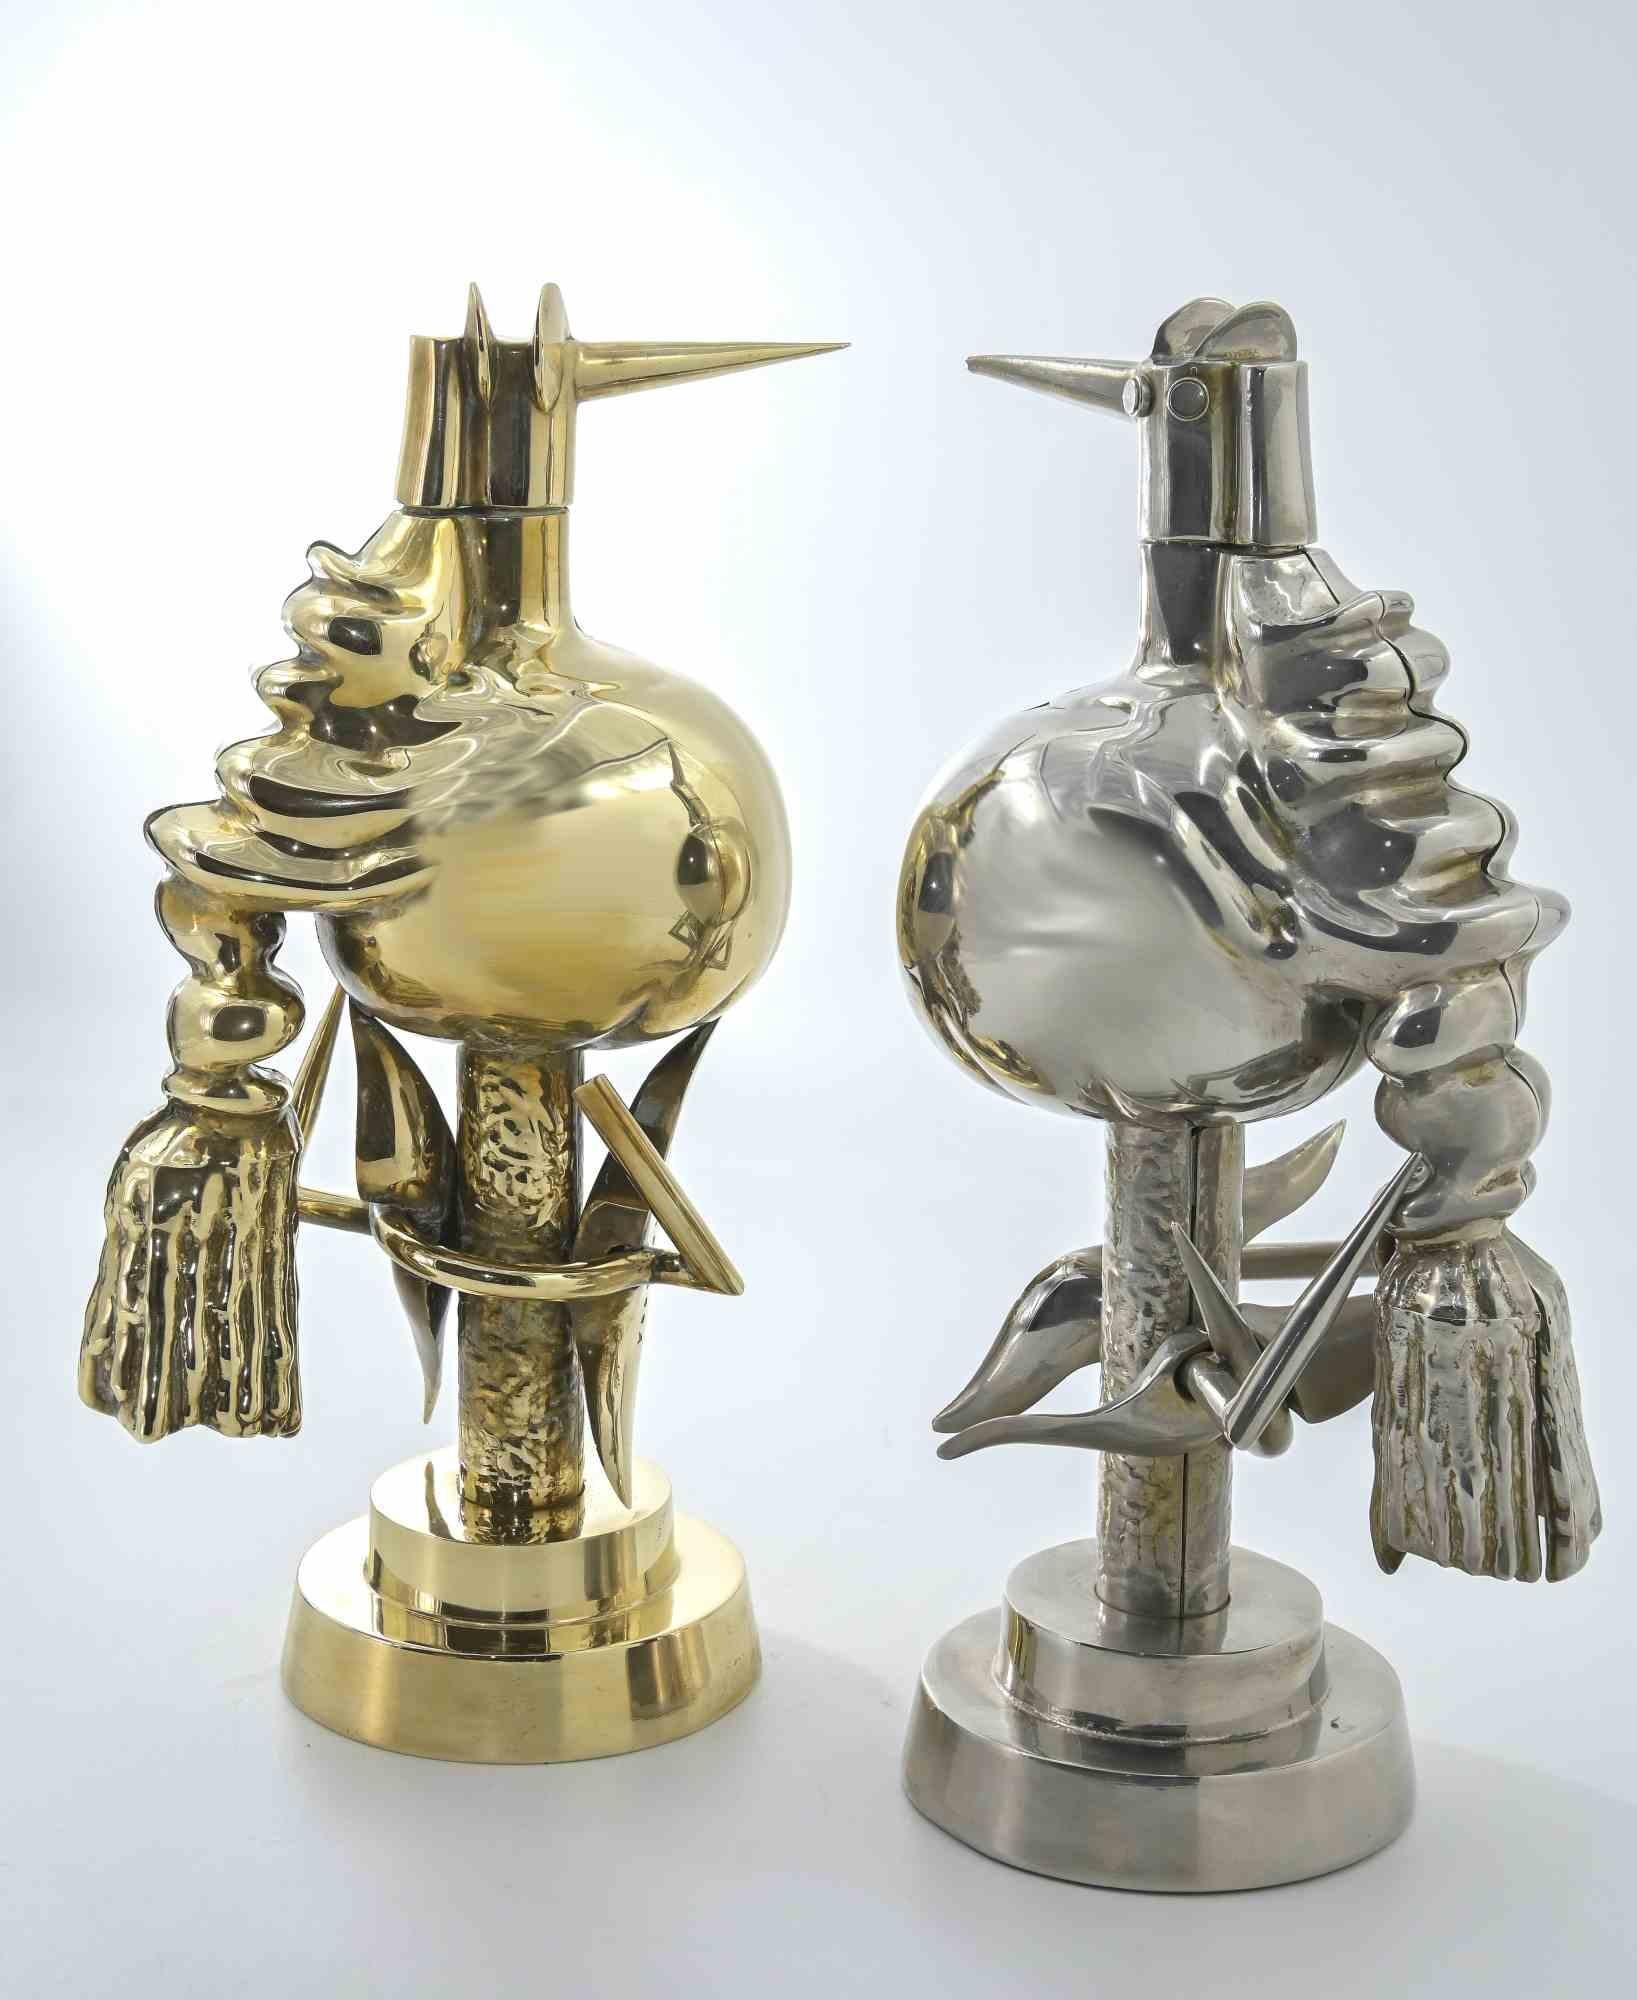 Oiseau du fer & Oiseau de feu is a work realized by Wifredo Lam in 1970s.  

Pair of polished metal sculptures and chromed bronze.

h cm 26.5 x 14.  each. 

Both signed and numbered 127/500. Very rare to find together, with same edition